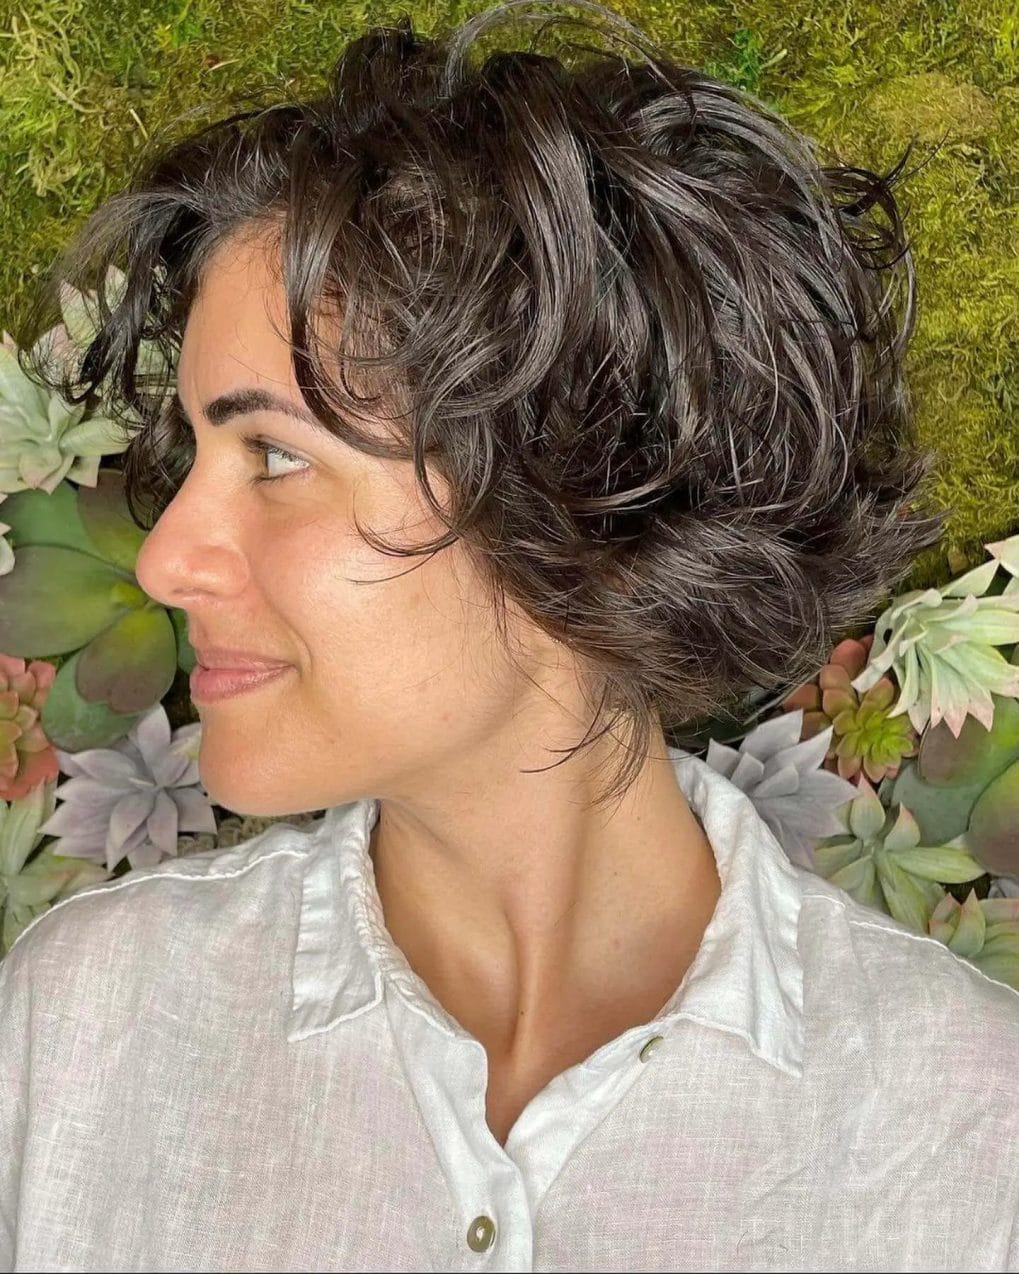 Vibrant short bixie with textured curls in glossy dark brown, ending above the neckline.